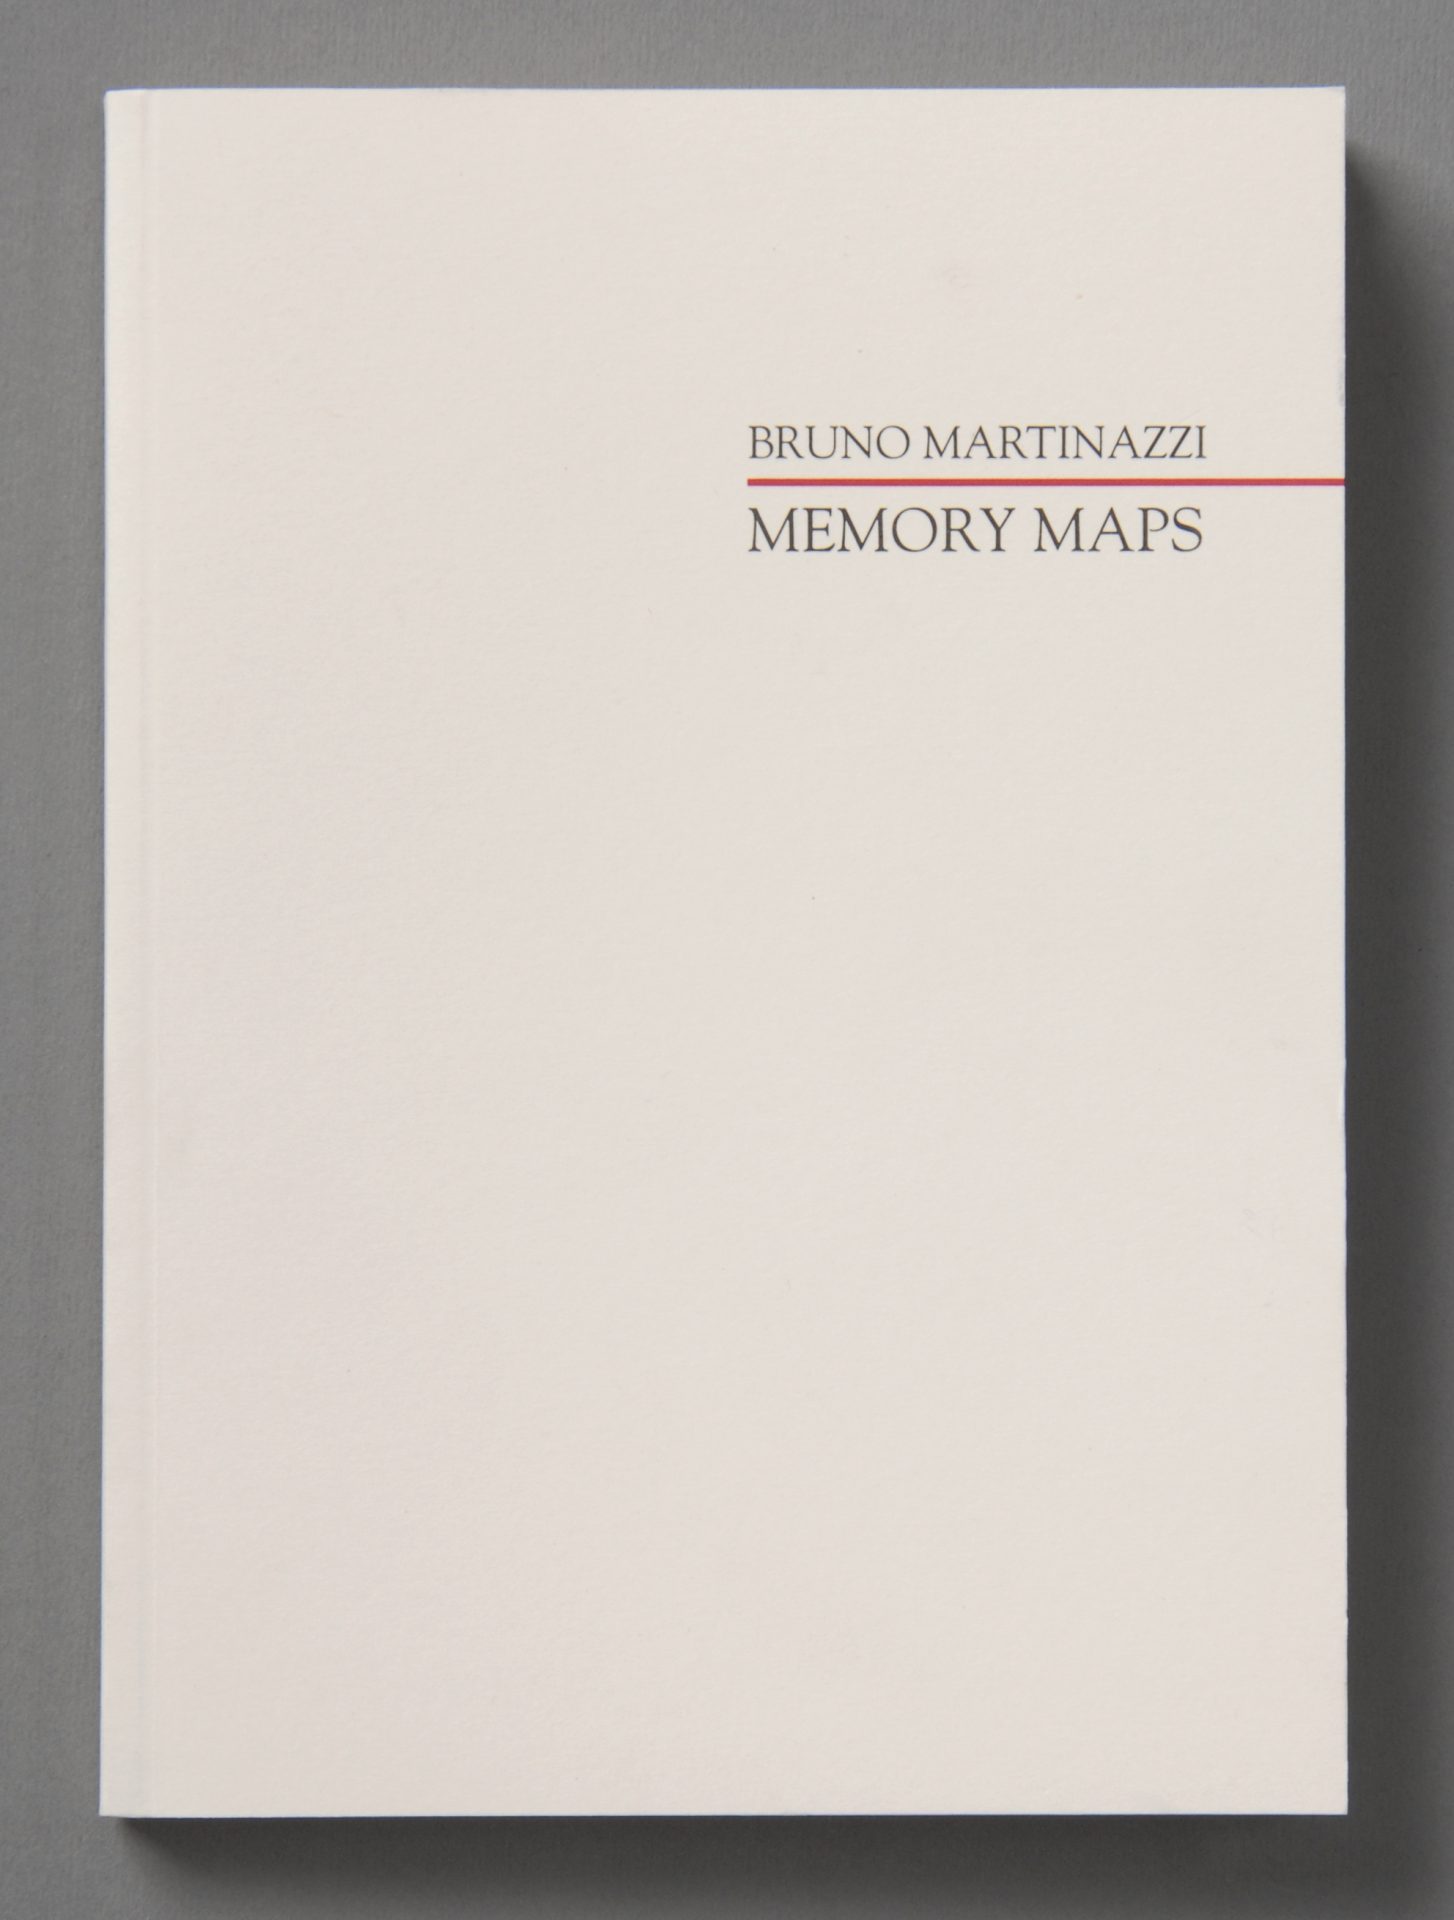 On cream-coloured paper, inscription in two lines at top right, separated by a red line: above, Bruno Martinazzi, below, Memory Maps.